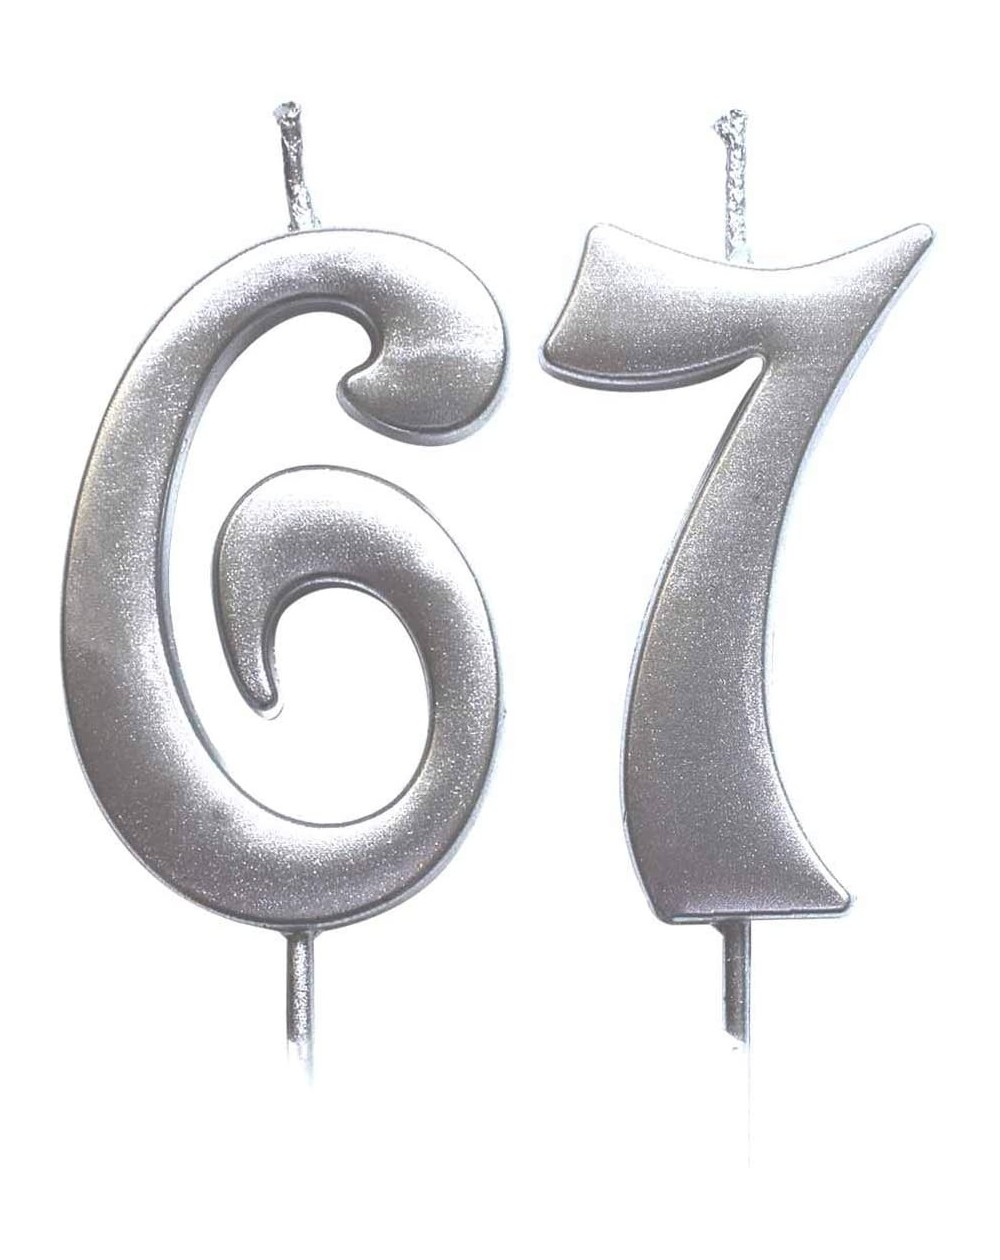 Birthday Candles Silver 67th Birthday Numeral Candle- Number 67 Cake Topper Candles Party Decoration for Women or Men - C618T...